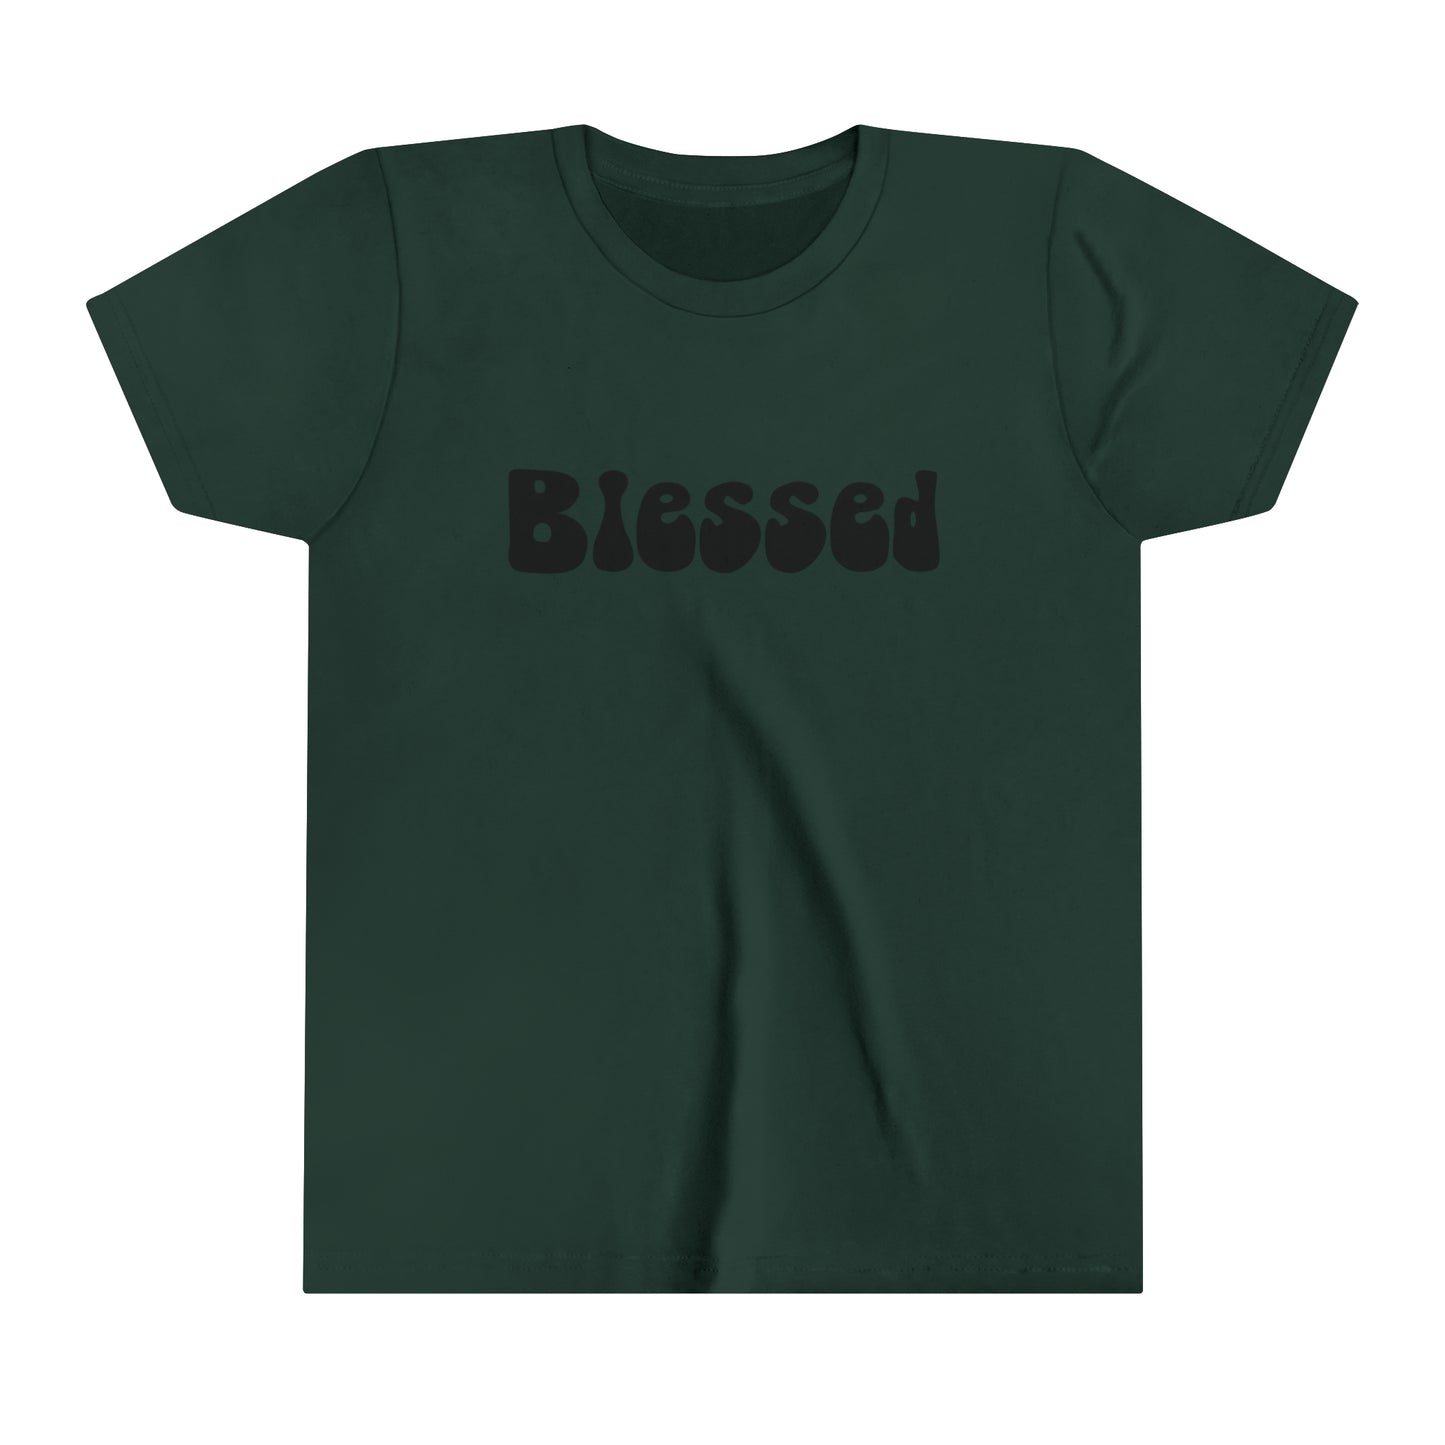 Groovy Blessed Black T-Shirt - Youth